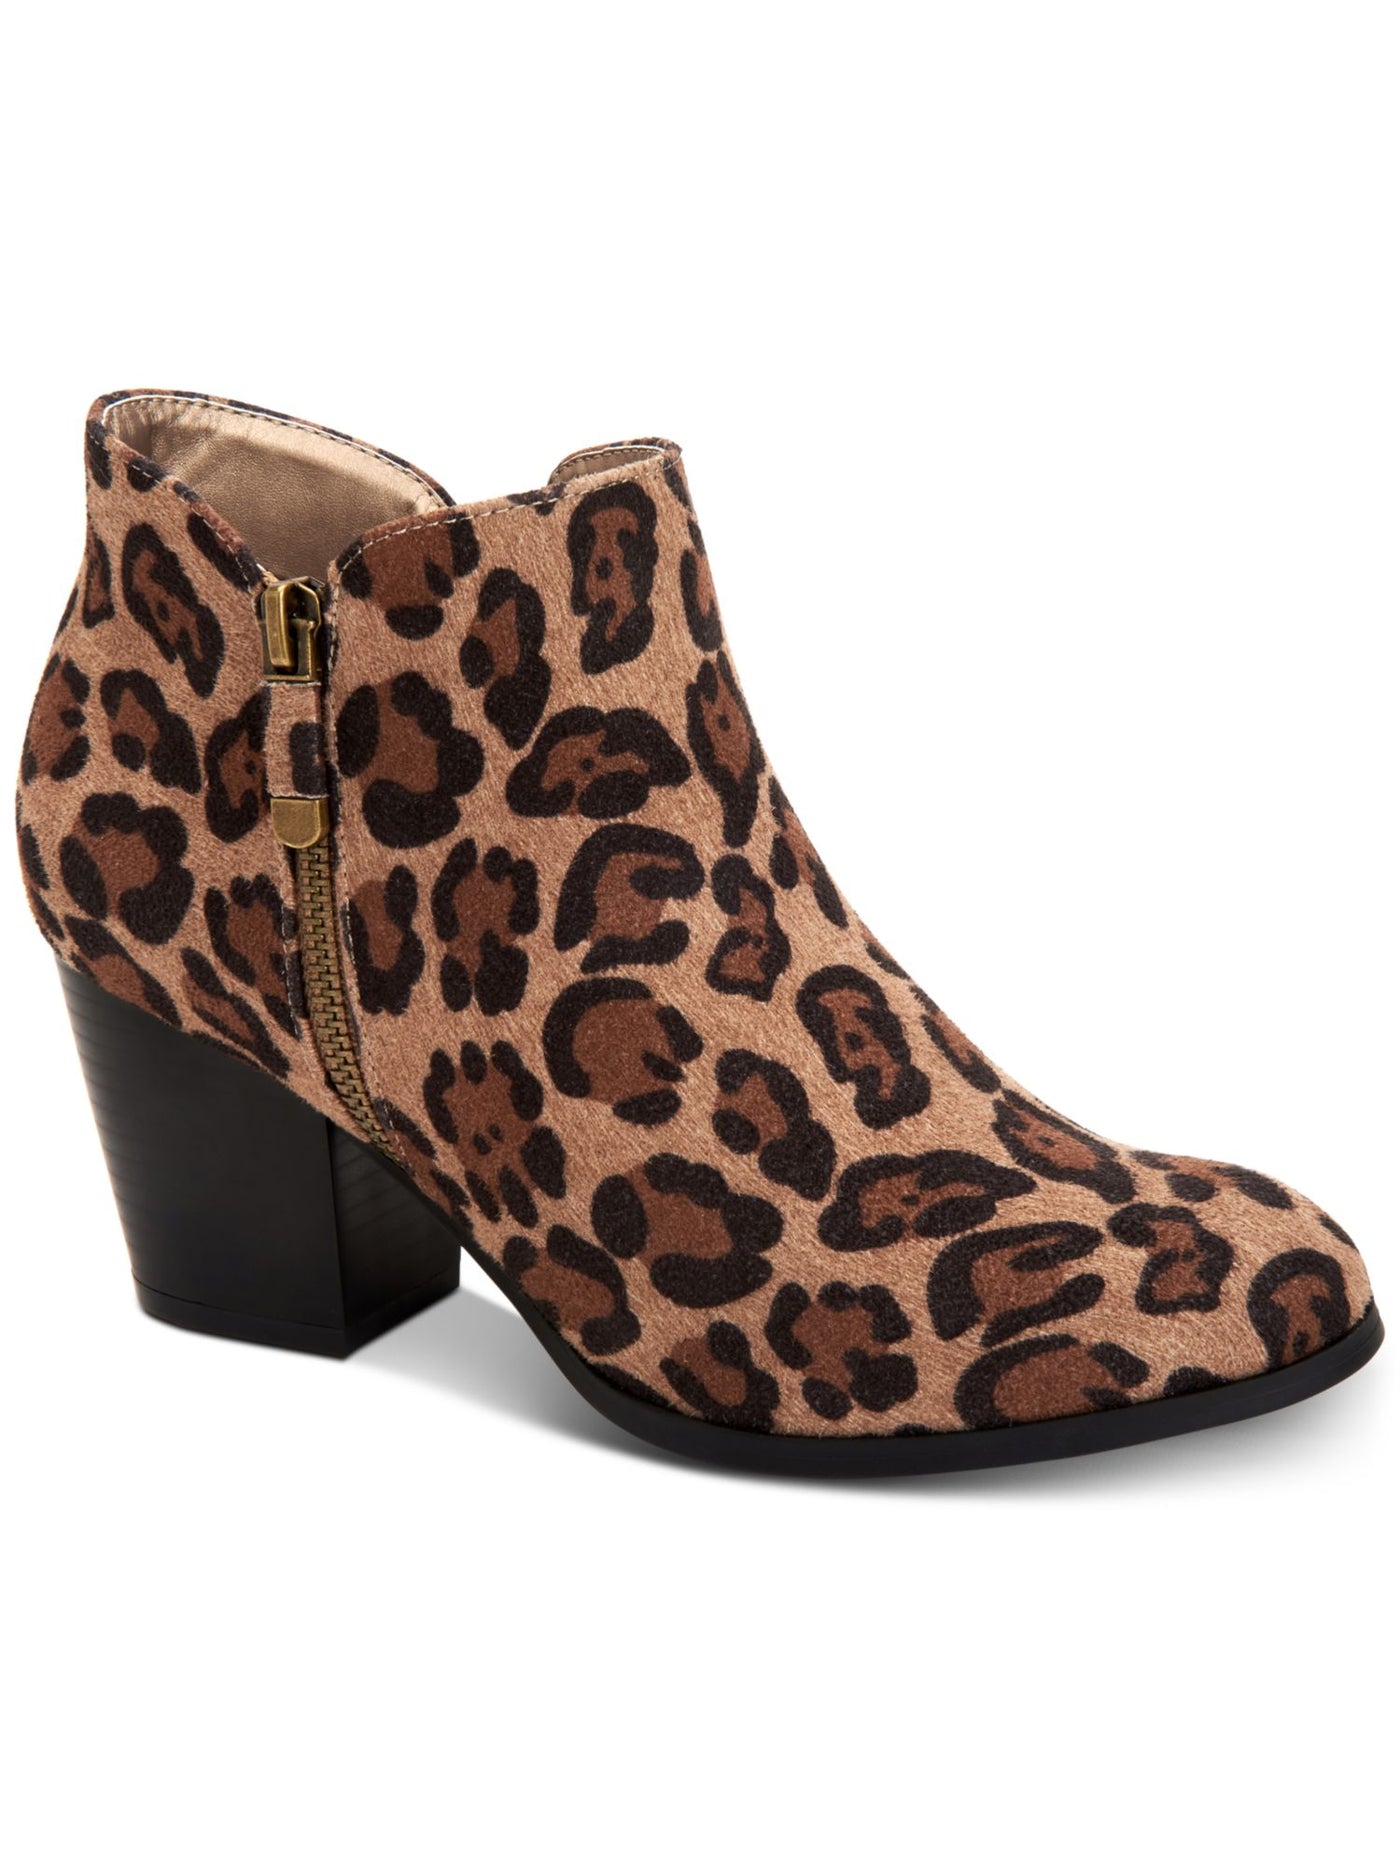 STYLE & COMPANY Womens Brown Animal Print Leopard Print Notched At Sides Cushioned Zipper Accent Masrinaa Almond Toe Block Heel Booties 6 M